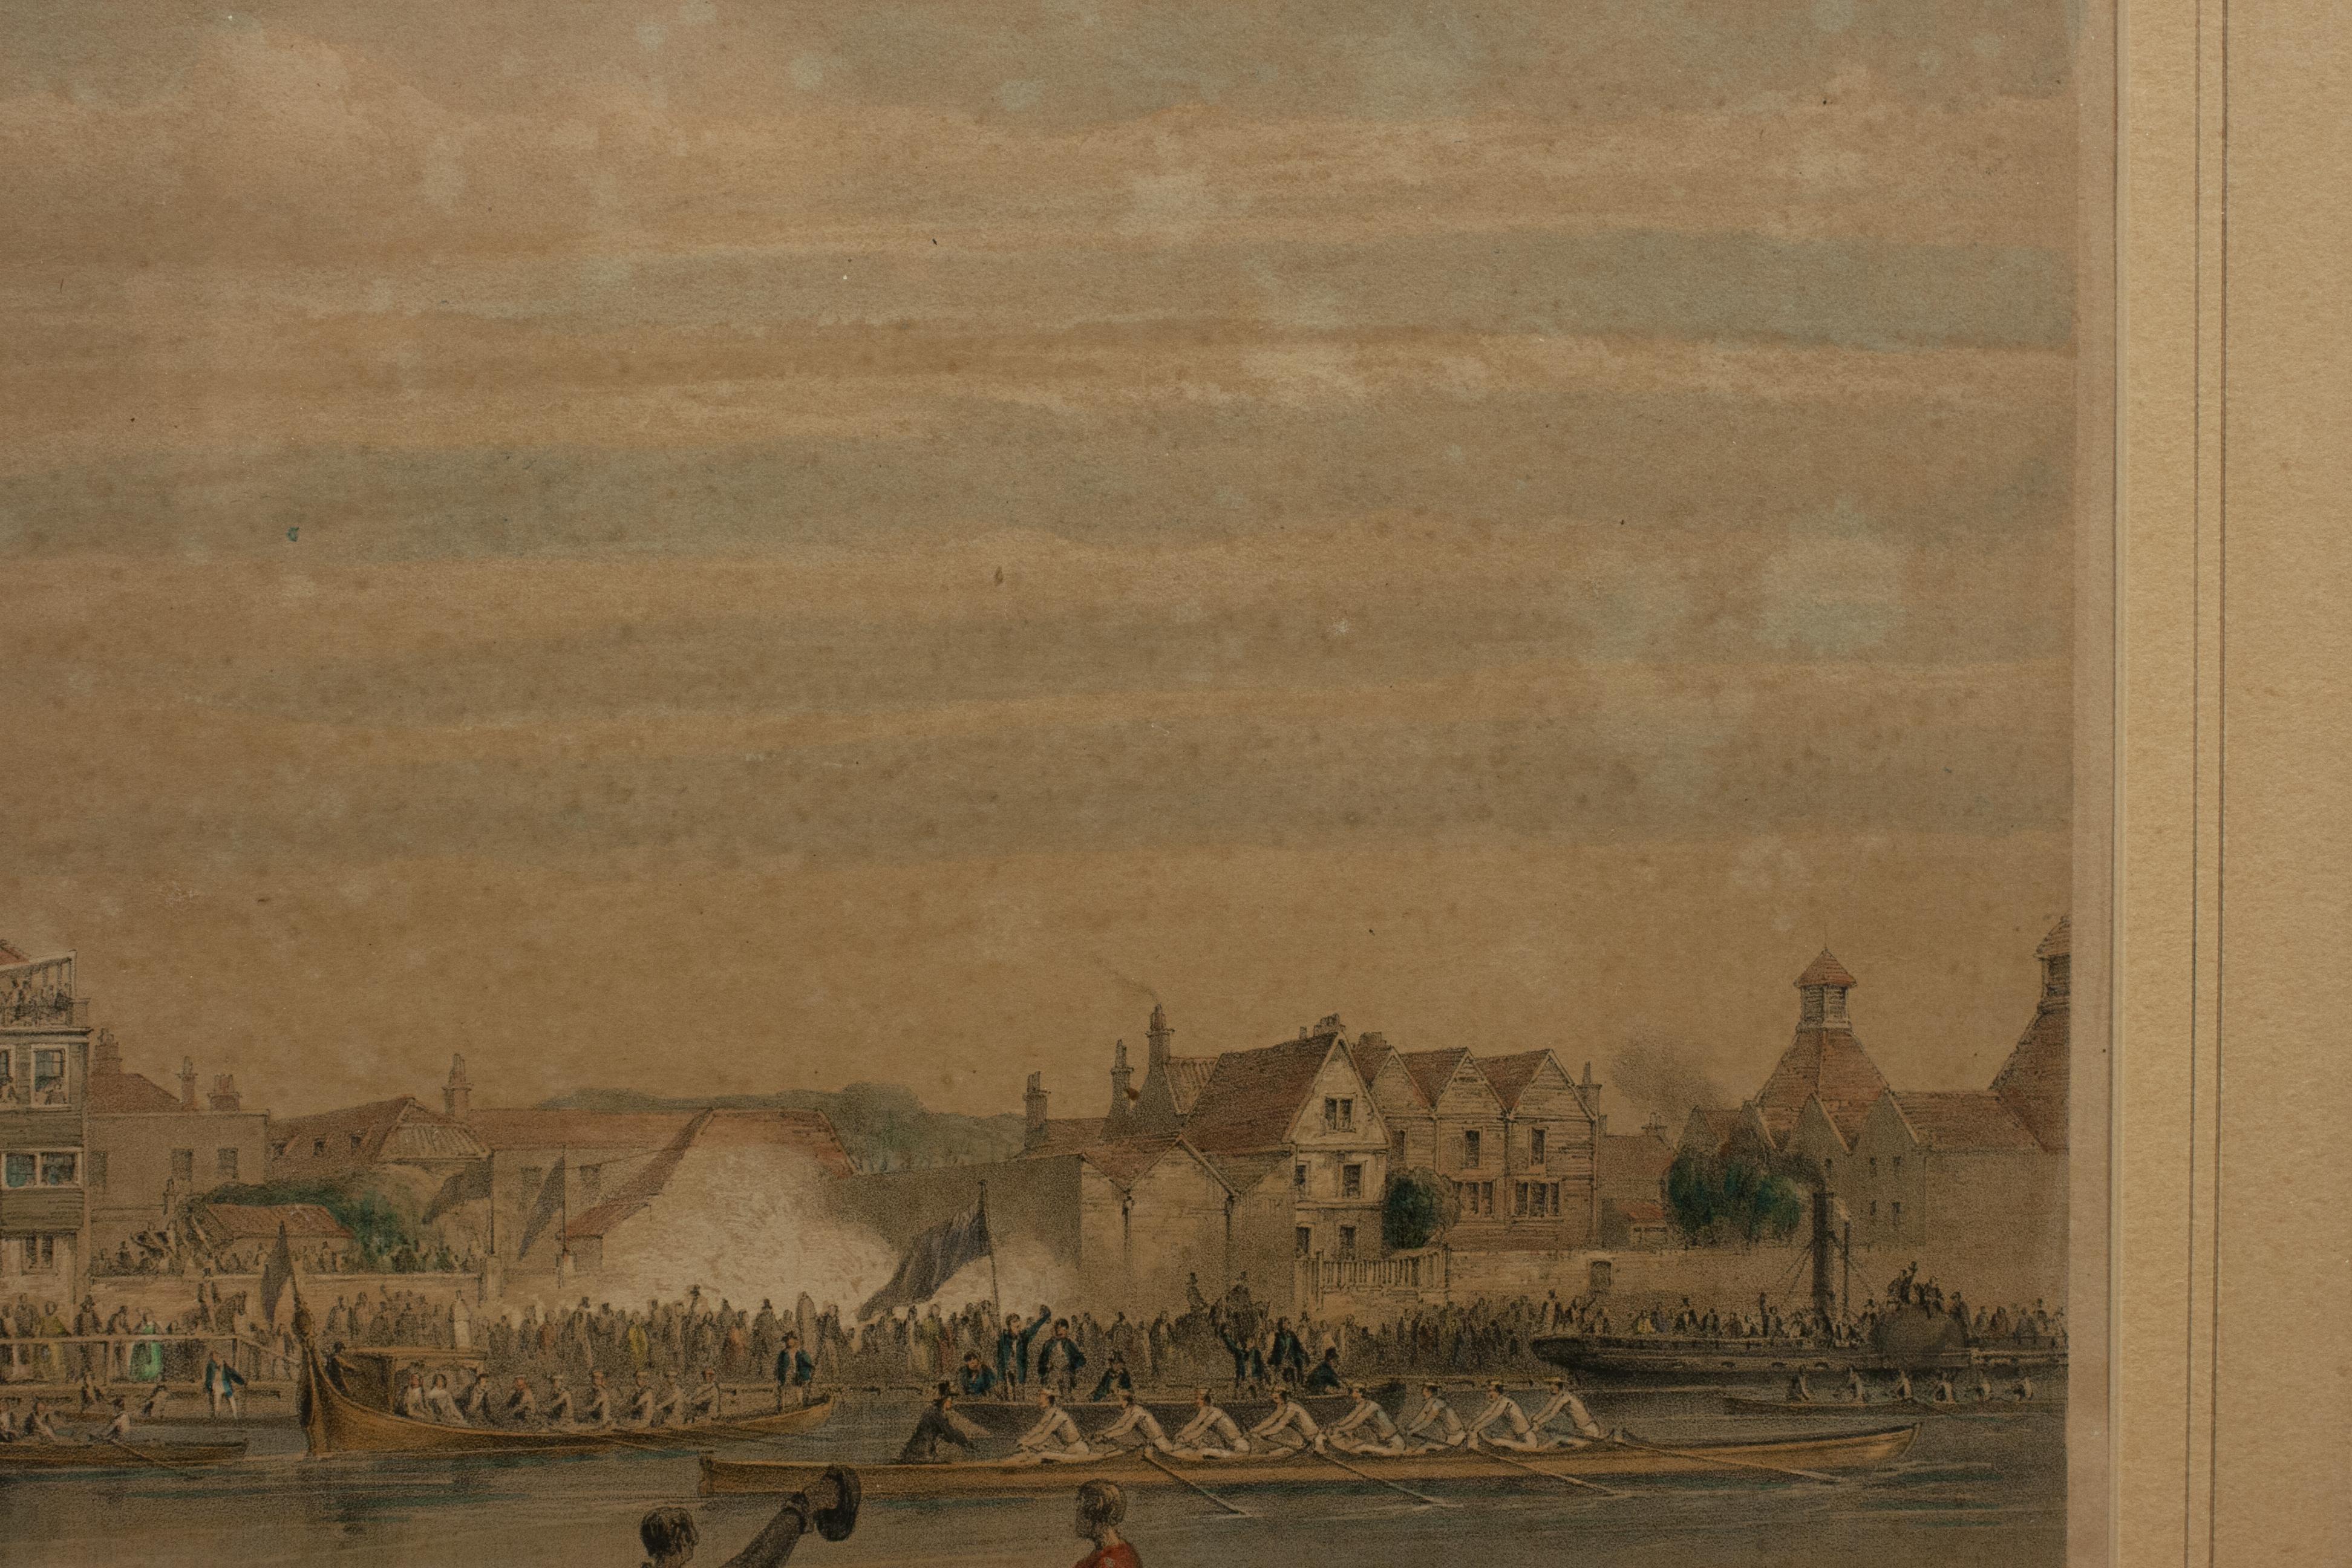 Paper Rare Rowing Lithograph, Eton V Westminster Rowed At Putney